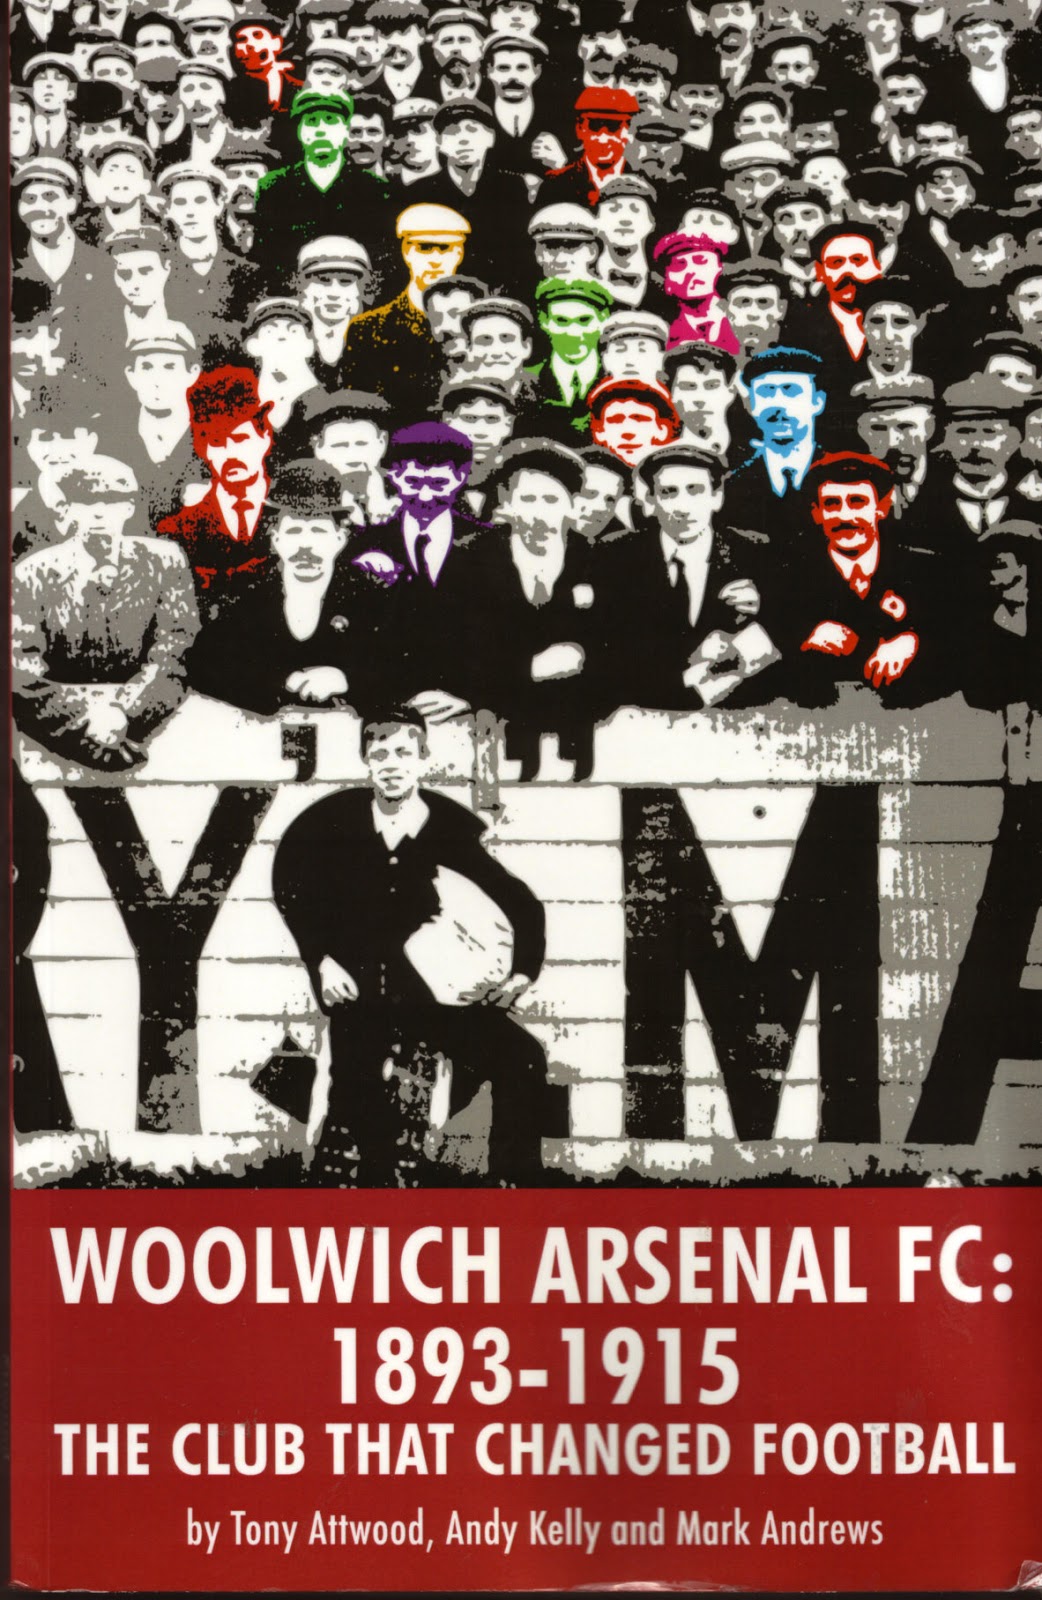 The Highbury Library: Arsenal Book Review - Woolwich Arsenal FC: 1893-1915